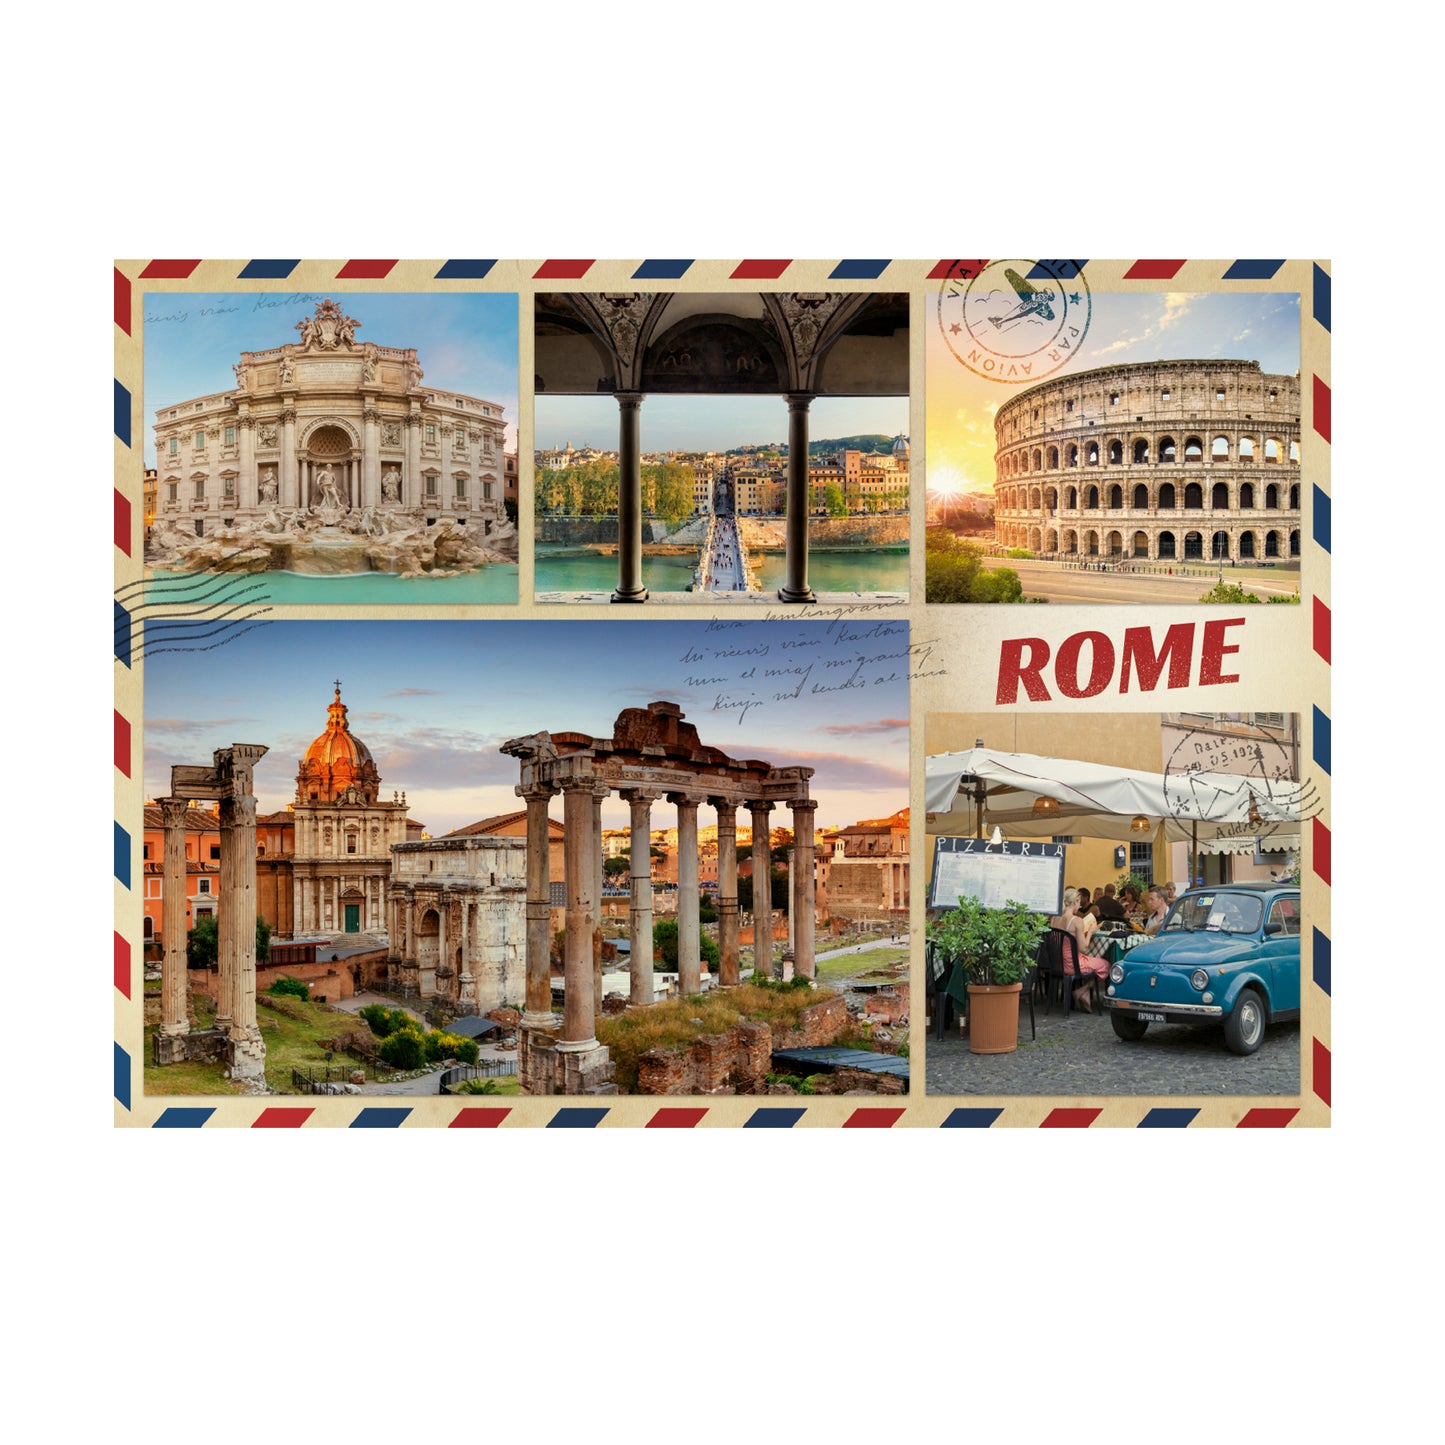 Premium Collection - Greetings from Rome -1000 pieces - product image - Jumboplay.com